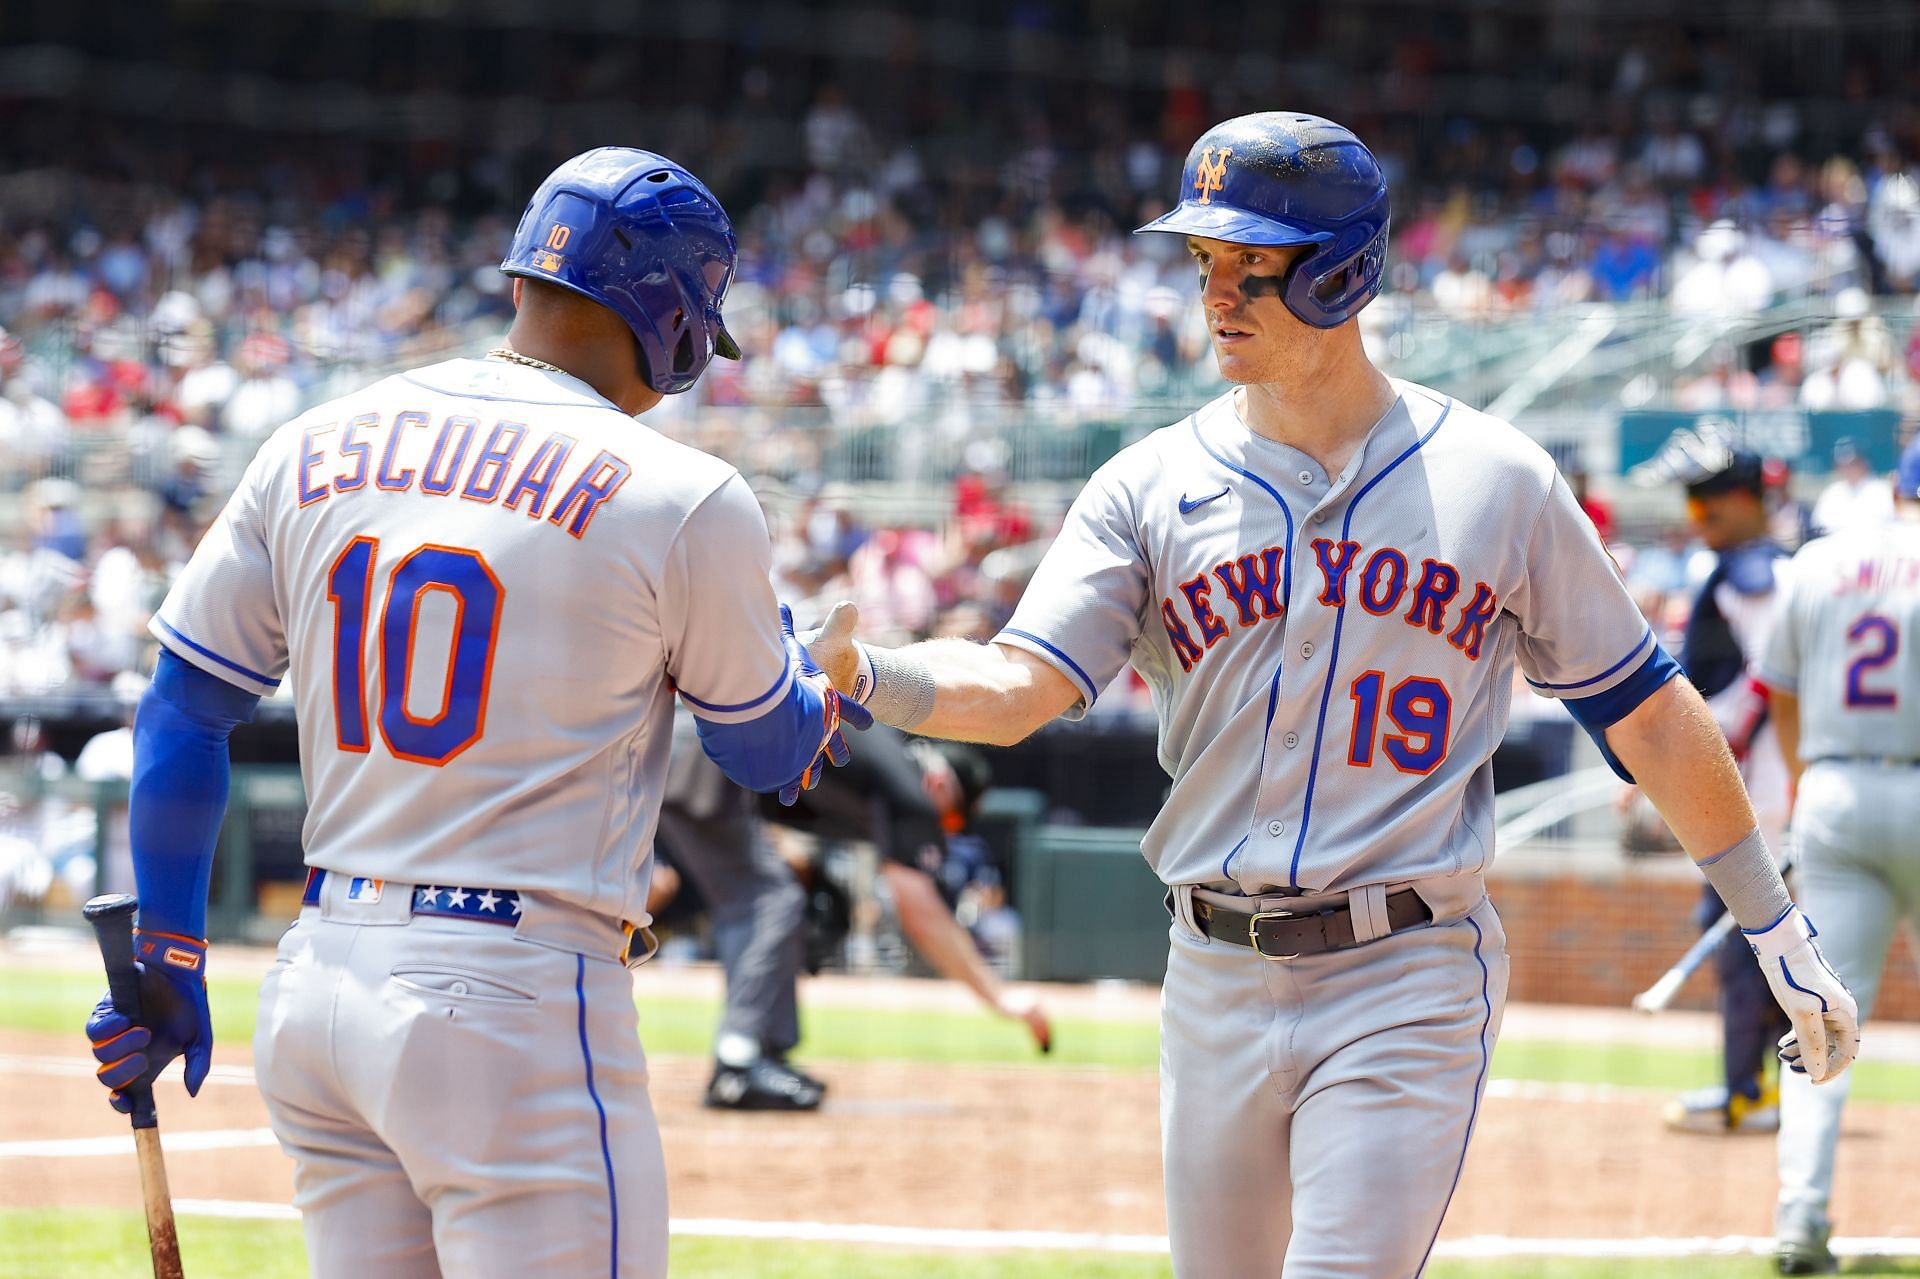 New York Mets news: Pete Alonso snaps back at Twitter troll